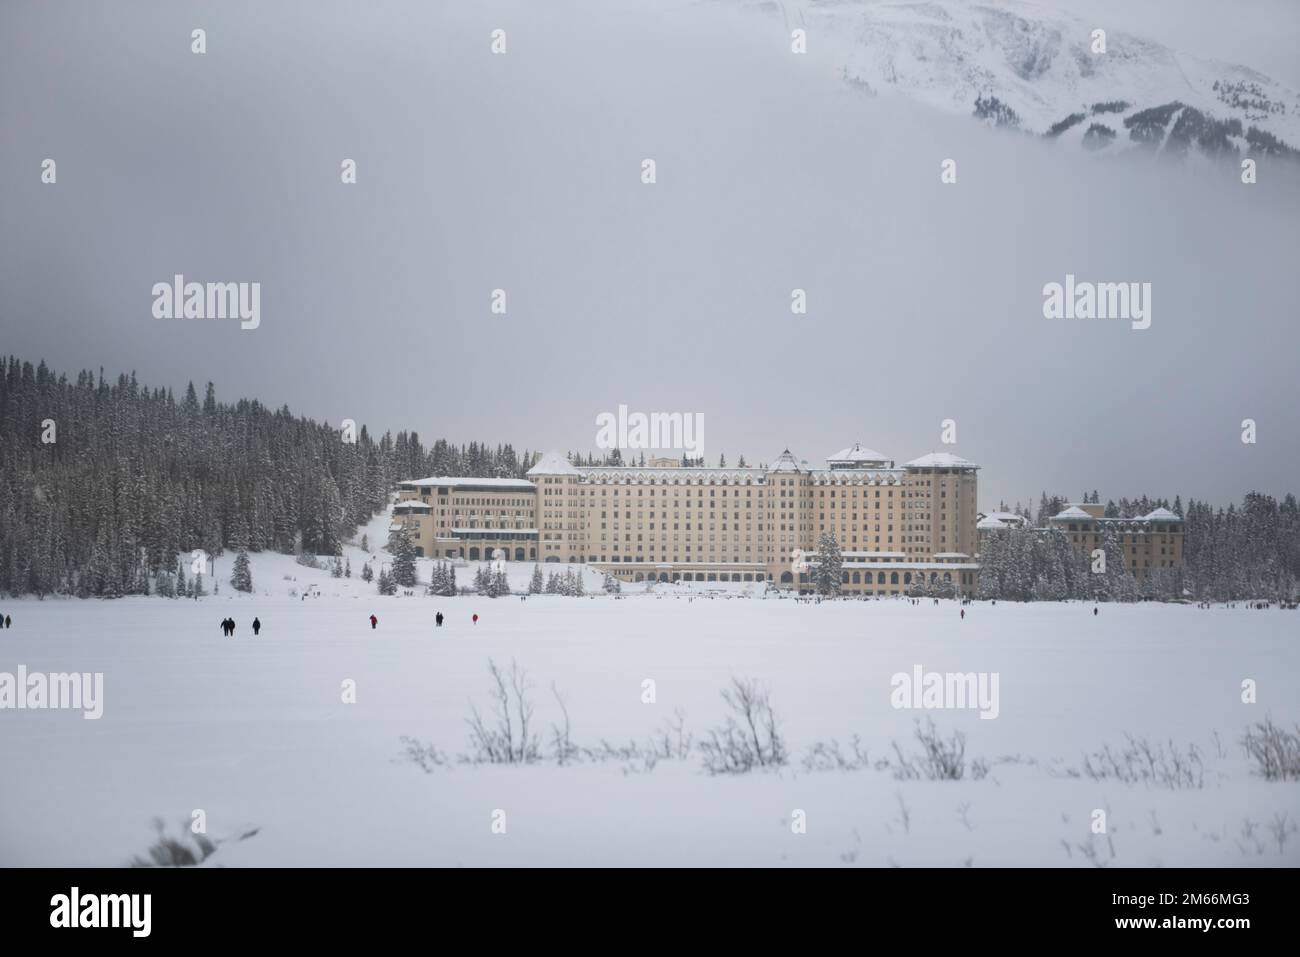 View of the Fairmont Lake Louise chateau, Banff National Park. Alberta, Canada. Stock Photo